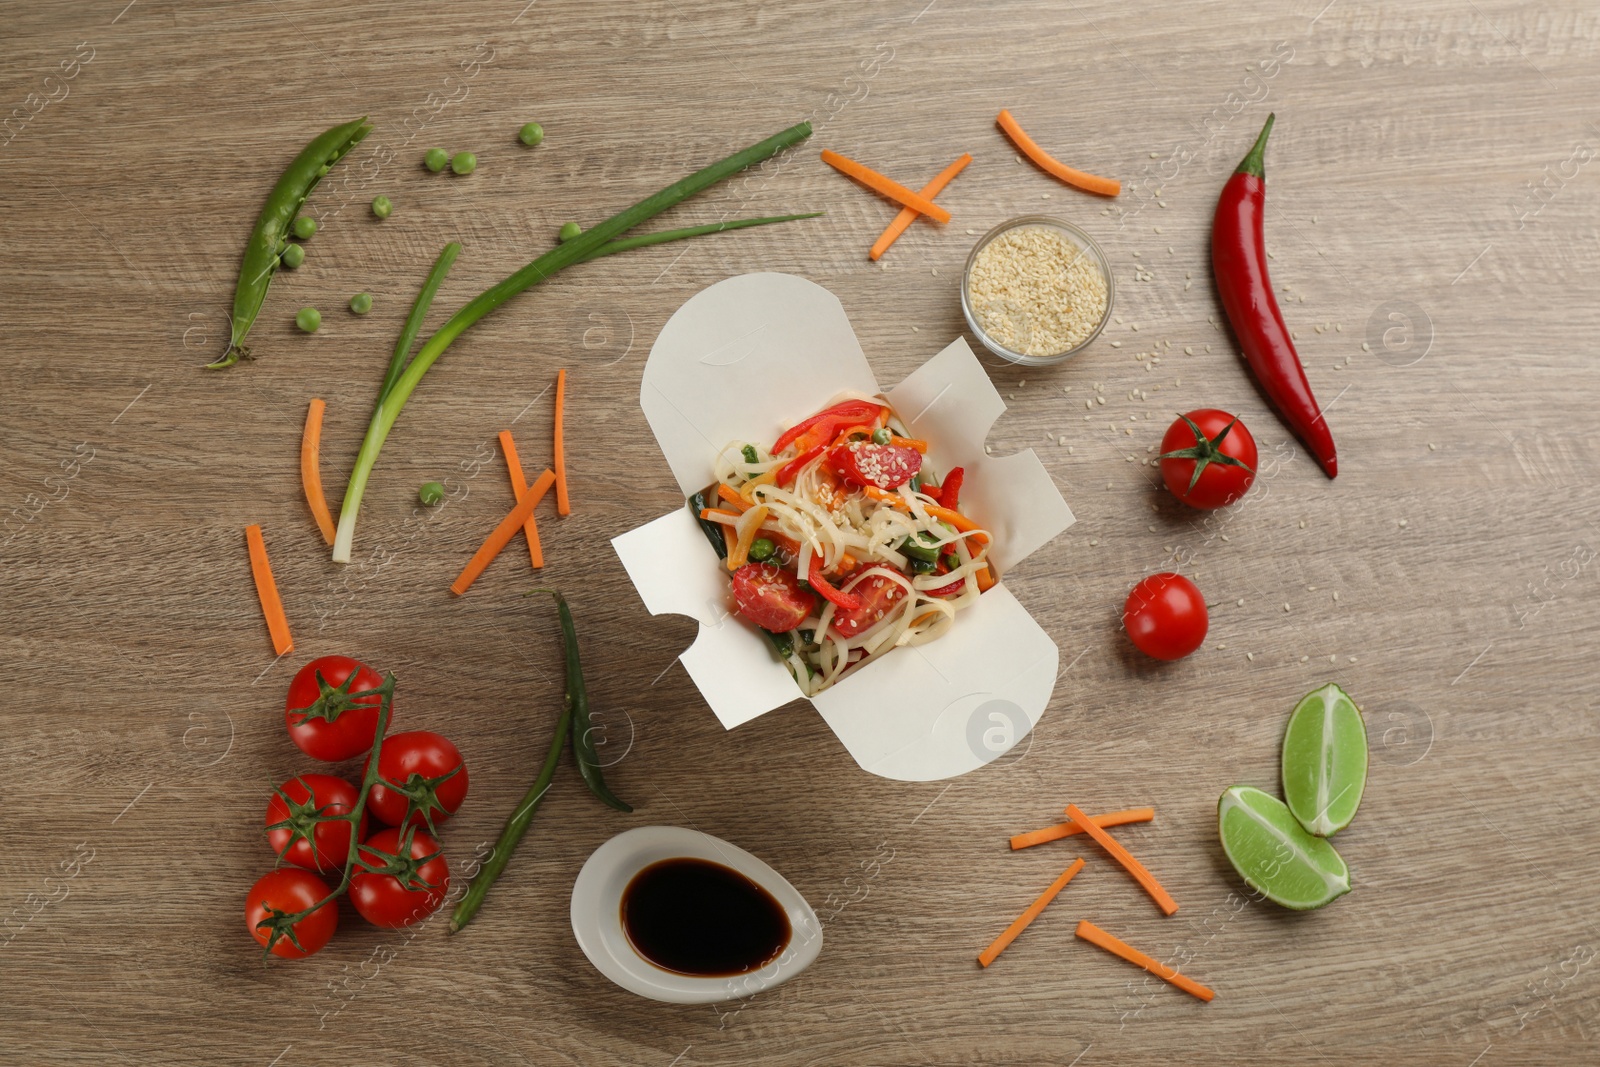 Photo of Box of vegetarian wok noodles with ingredients on wooden table, flat lay